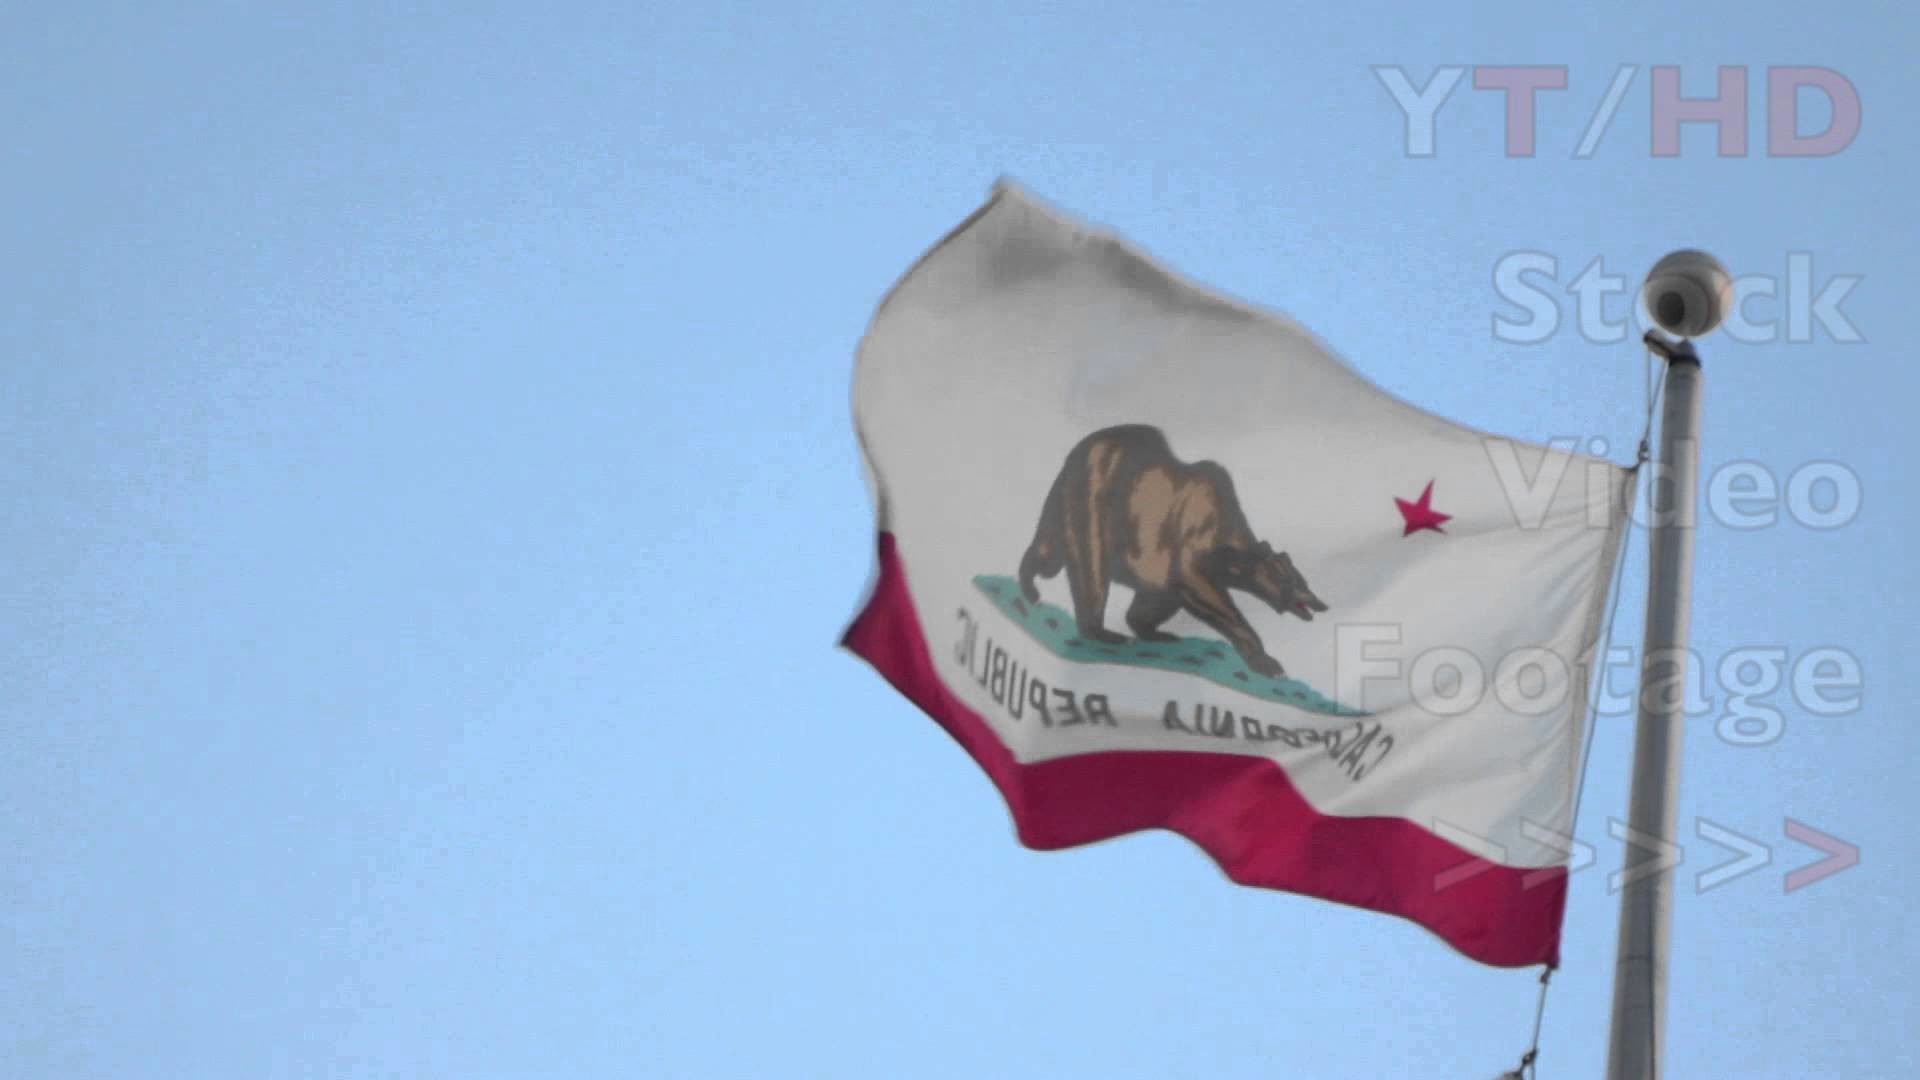 1920x1080 California State Flag w/ Bear & CA Republic Picture Waving on Flag Pole |  HD Stock Video Footage - YouTube